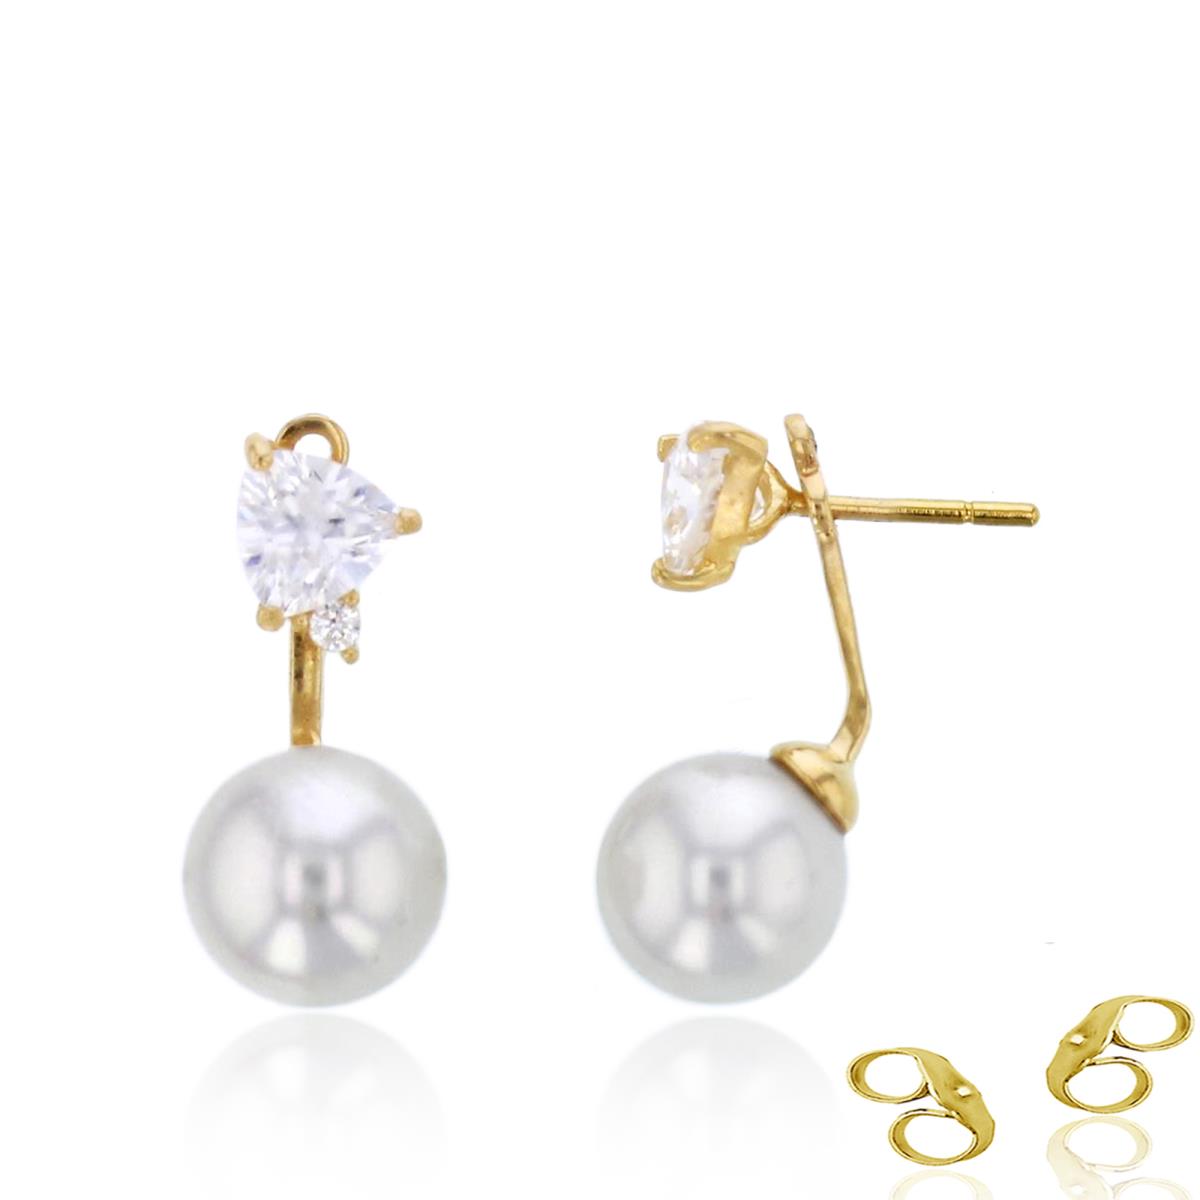 14K Yellow Gold Trill/Rnd Cr. White Sapphire & 6mm Synthetic Pearl Top/Bottom Earrings with 4.5mm Clutch